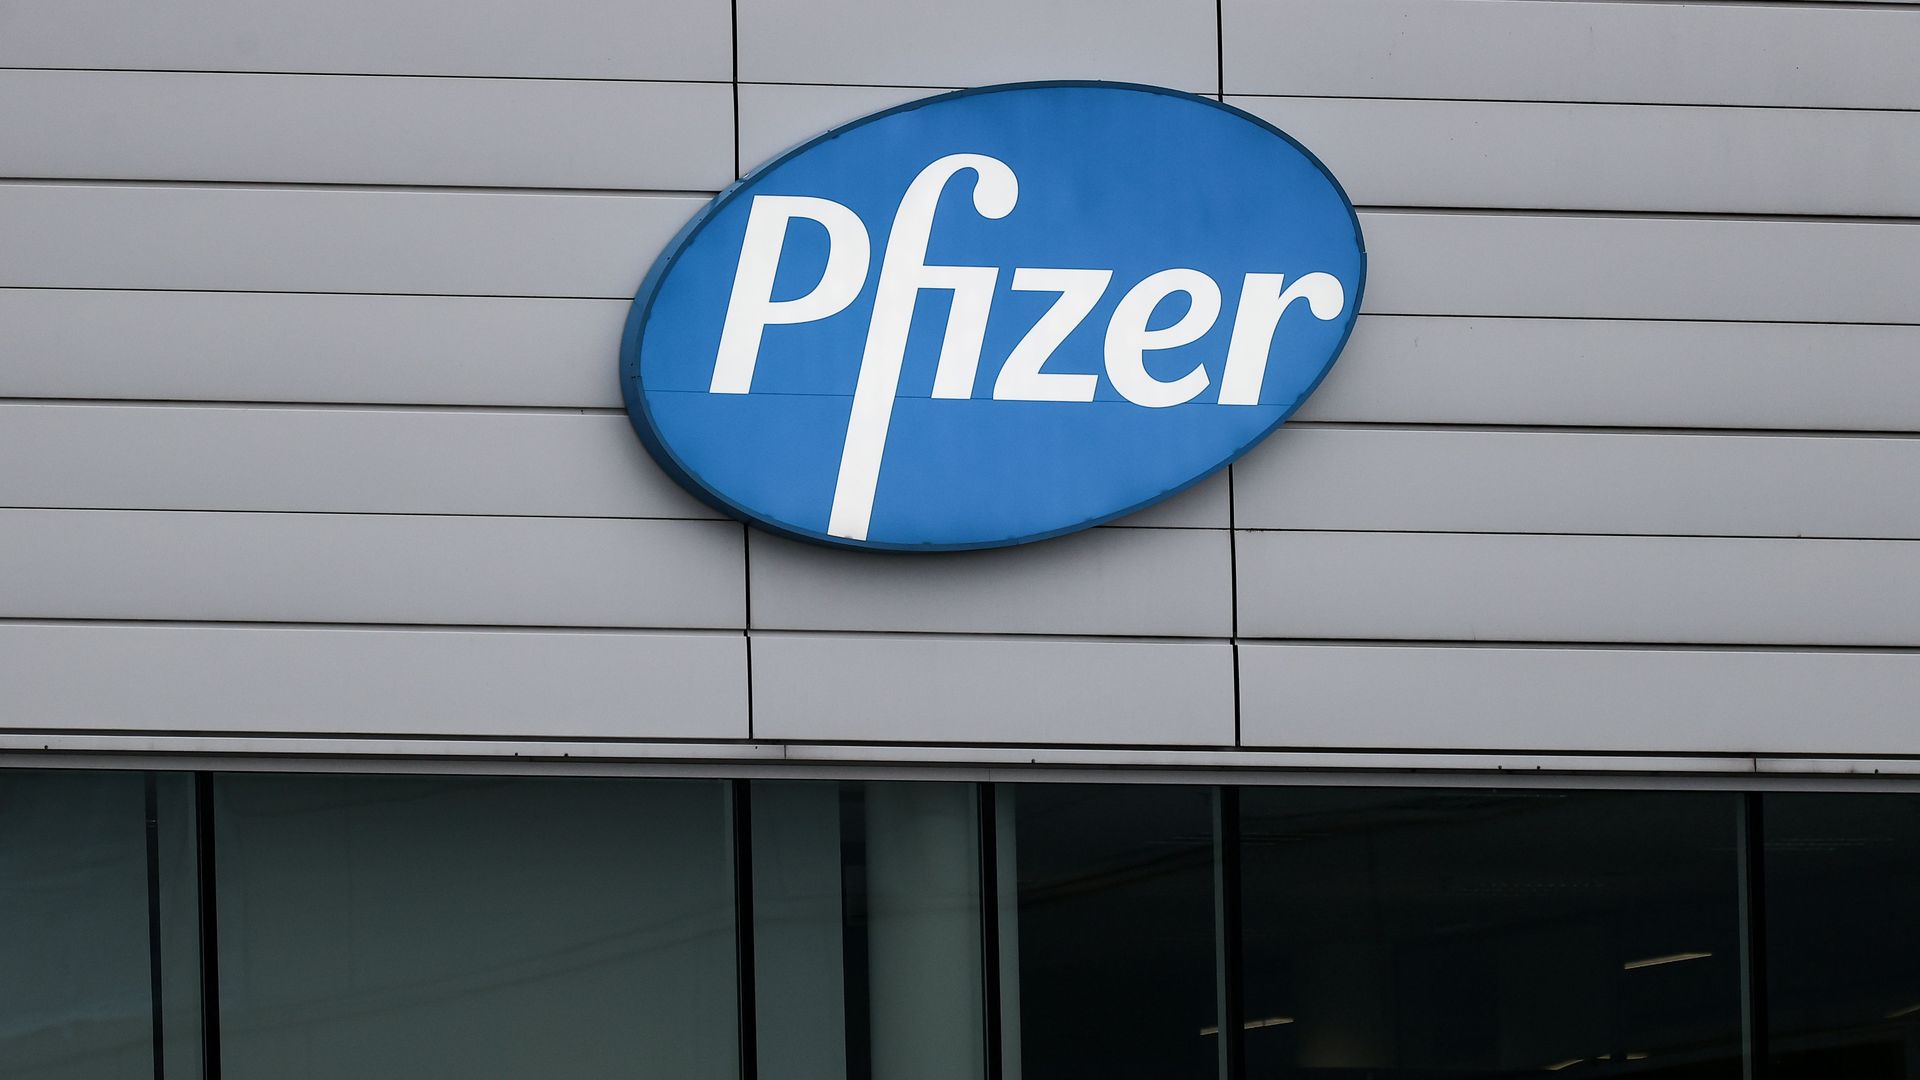 The Pfizer logo on the side of a building